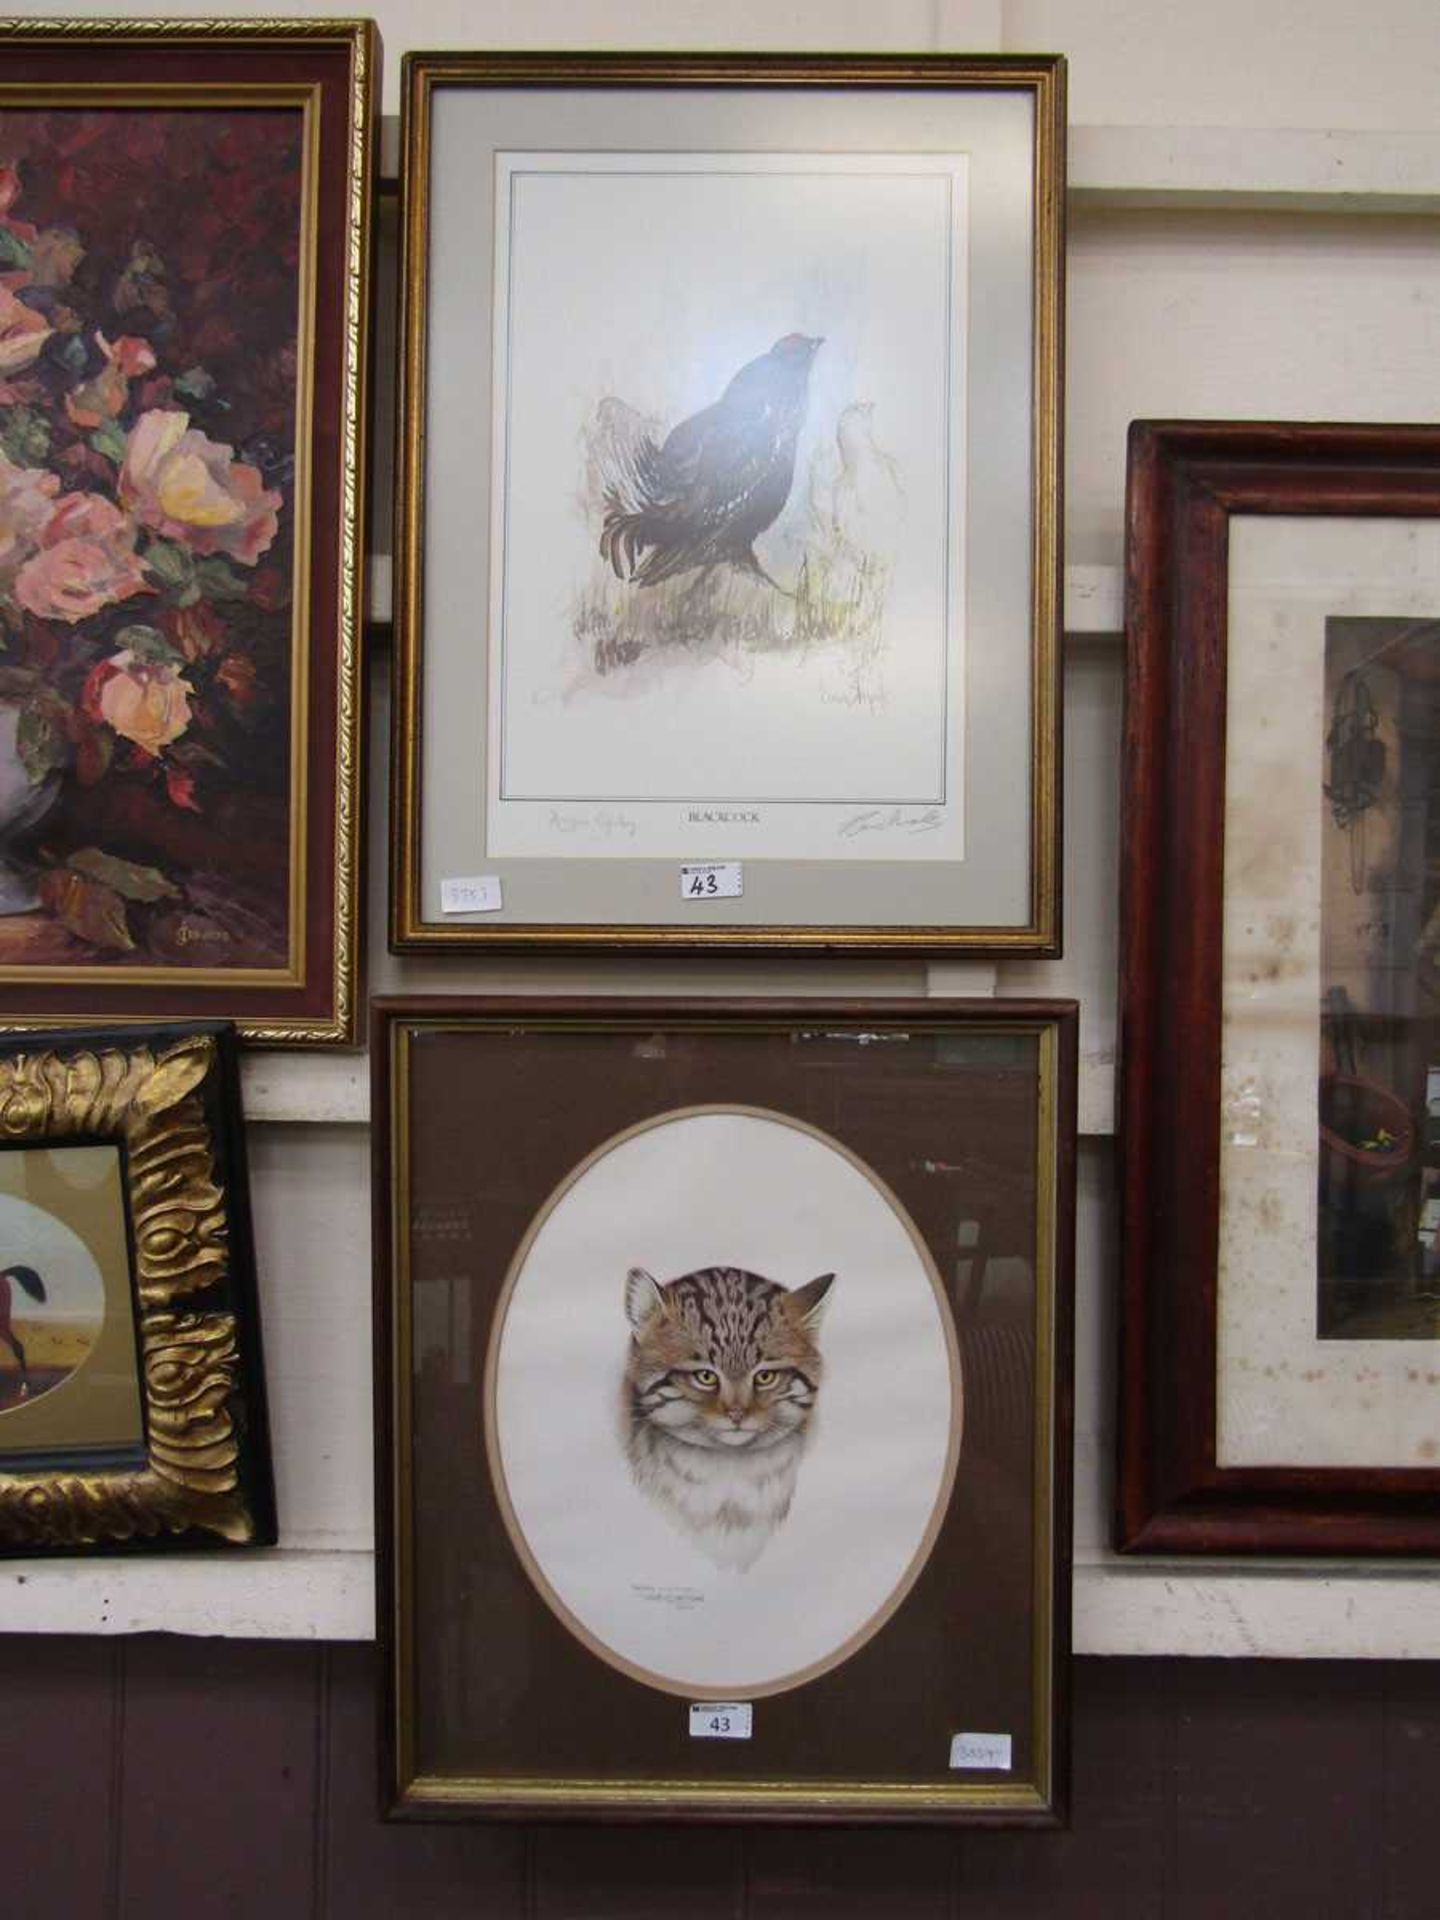 Two framed and glazed limited edition prints one titled 'Blackcock' the other depicting wild cat